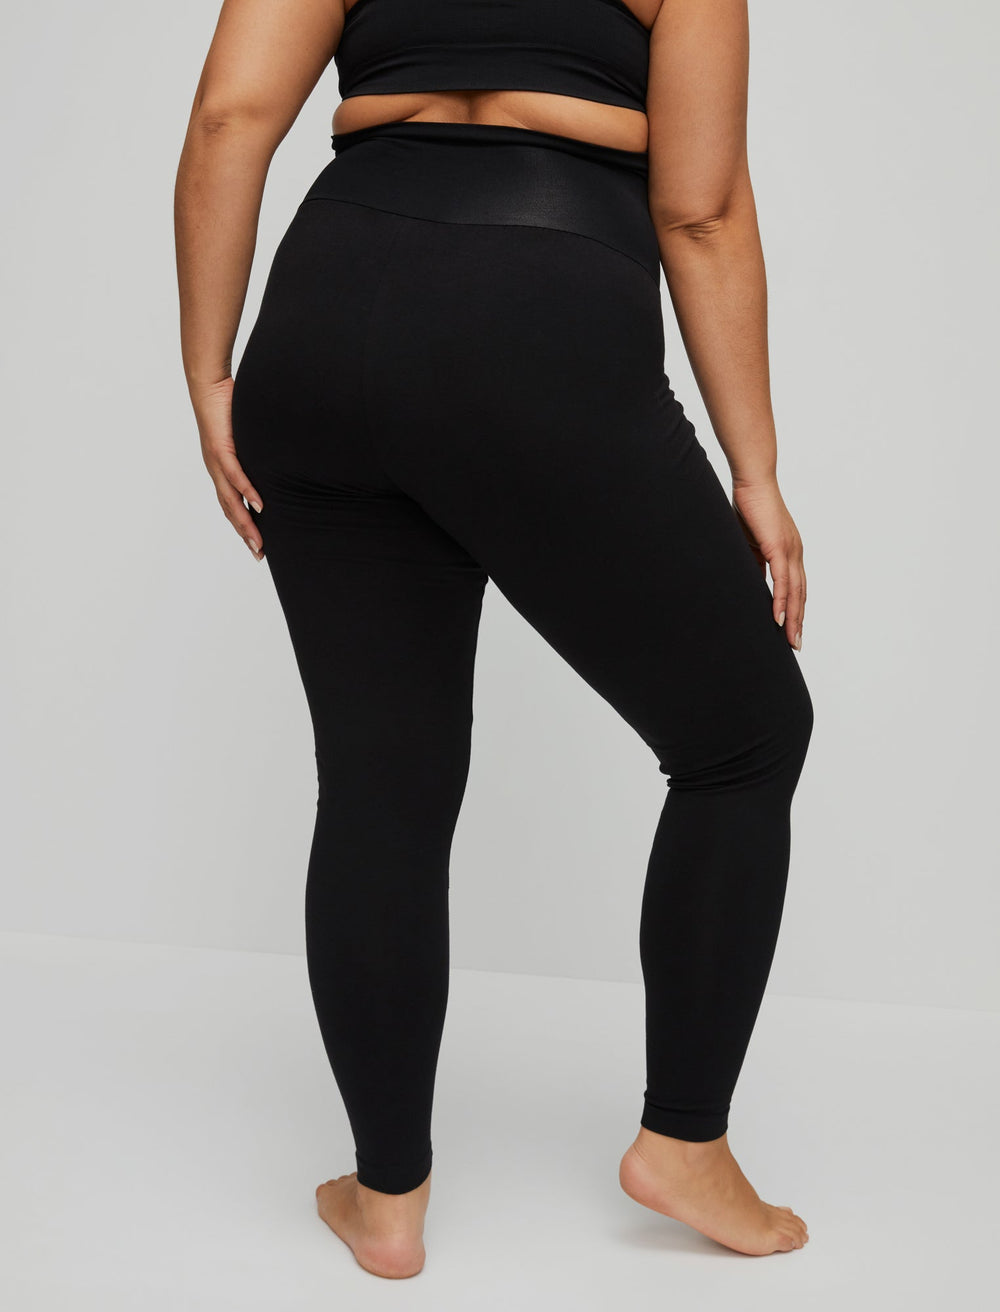 These leggings have so much tummy control, perfect for postpartum